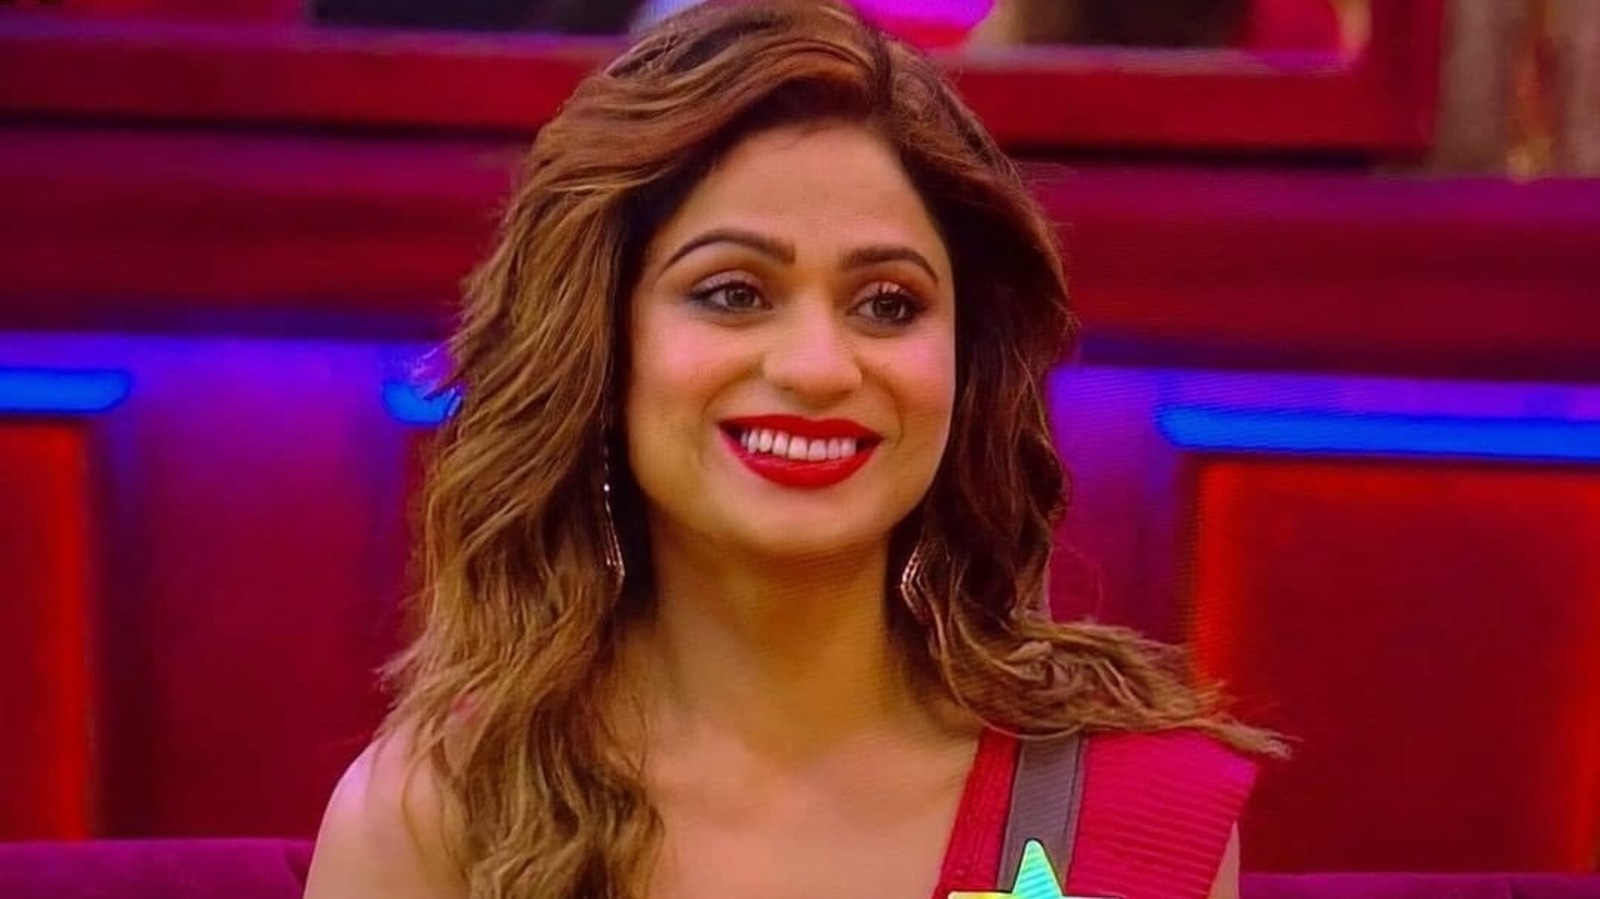 Shamita Shetty says she is seeking therapy after Bigg Boss 15, ‘wanted to run away’ from birthday party